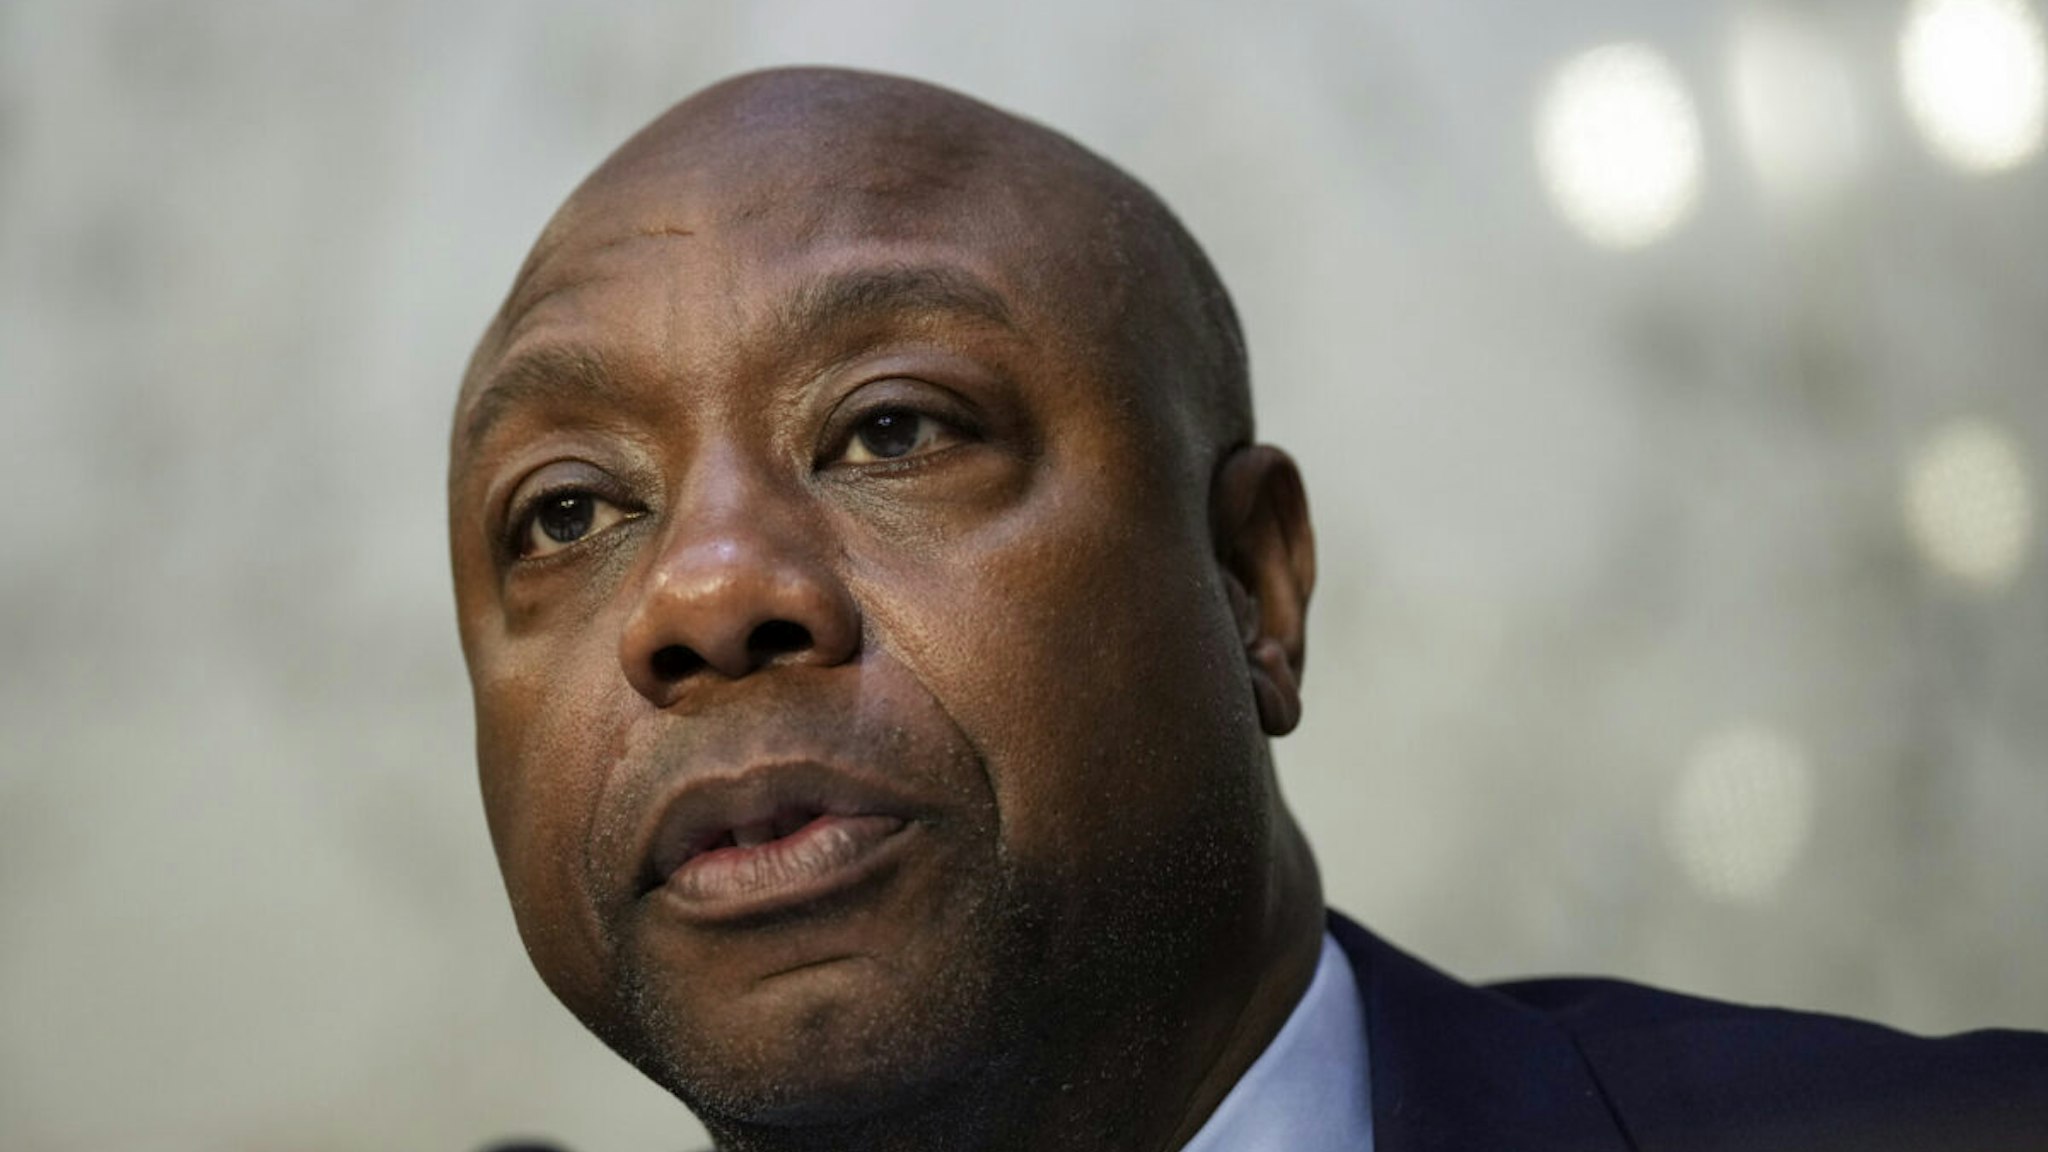 WASHINGTON, DC - JUNE 21: Committee ranking member Sen. Tim Scott (R-SC) speaks during a Senate Banking nominations hearing on June 21, 2023 in Washington, DC. The committee heard testimony from two nominees, Lisa DeNell Cook and Dr. Adriana Kugler, to be on the Federal Reserve Board of Governors and Philip Jefferson to be Vice Chairman of the Board.